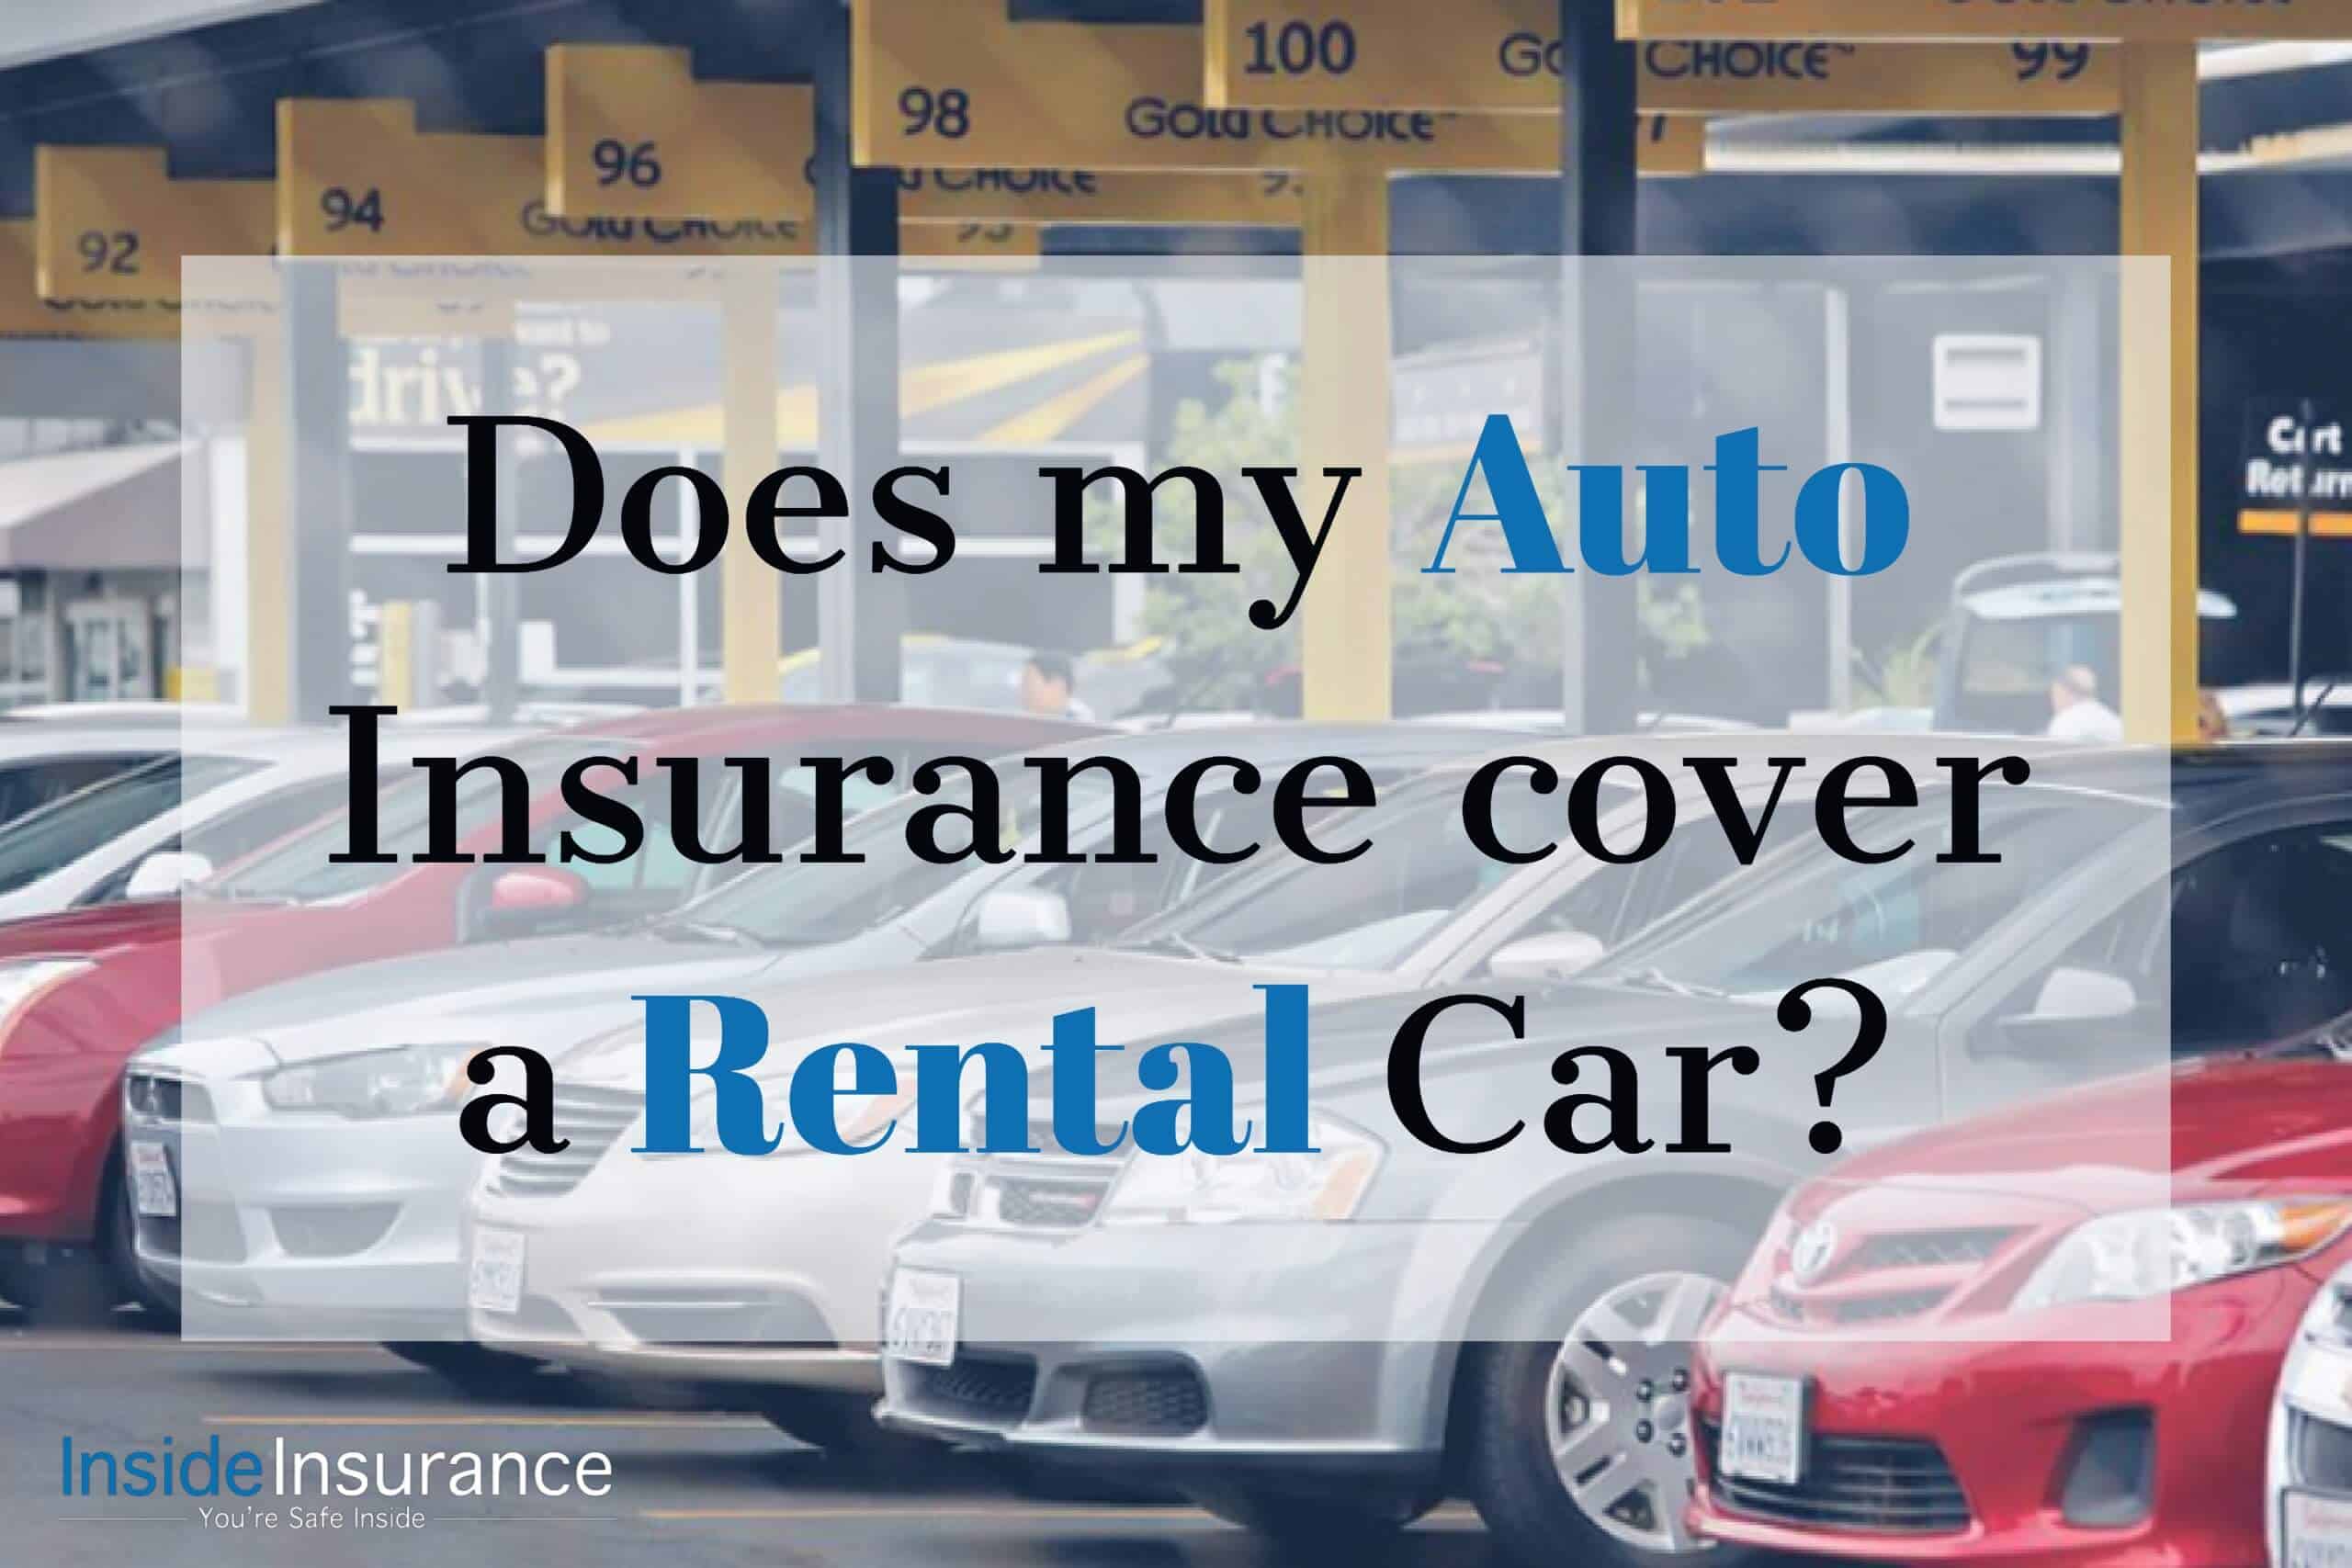 Does my Auto Insurance cover a Rental Car?